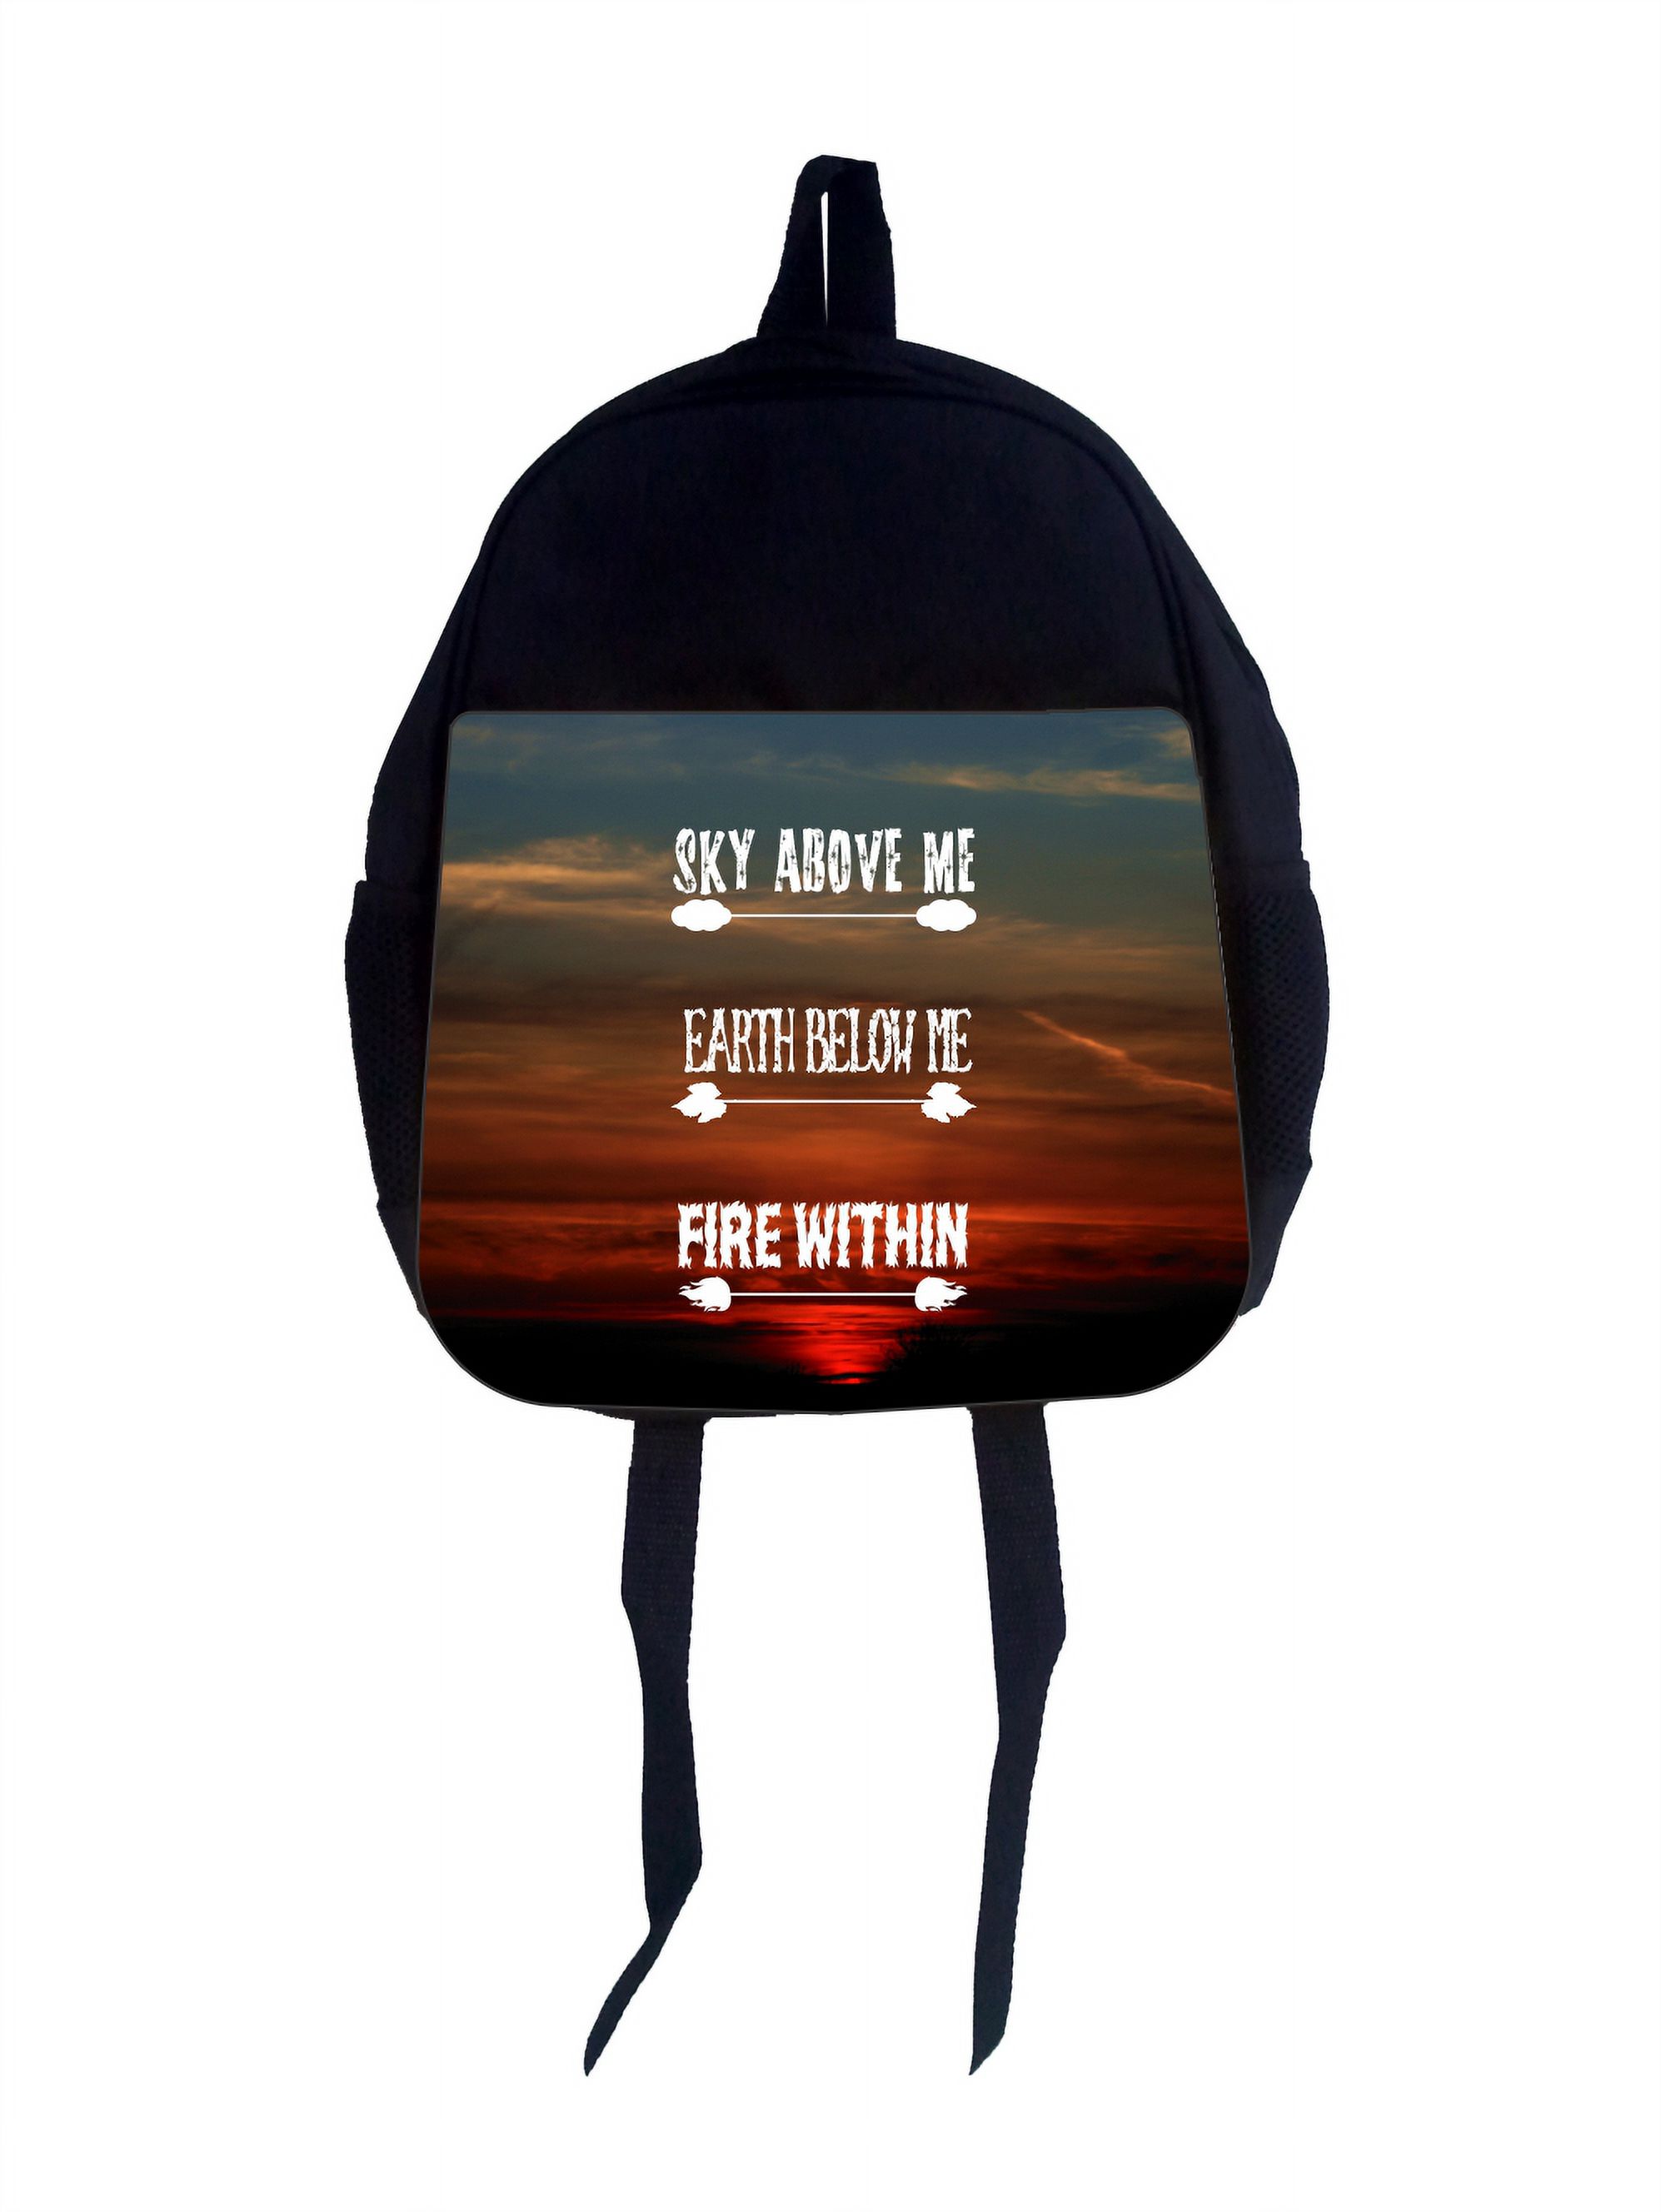 Sky Above Me, Earth Below Me, Fire Within - Inspirational Quote - Girls 13" x 10" Black Preschool Toddler Children's Backpack - image 1 of 2